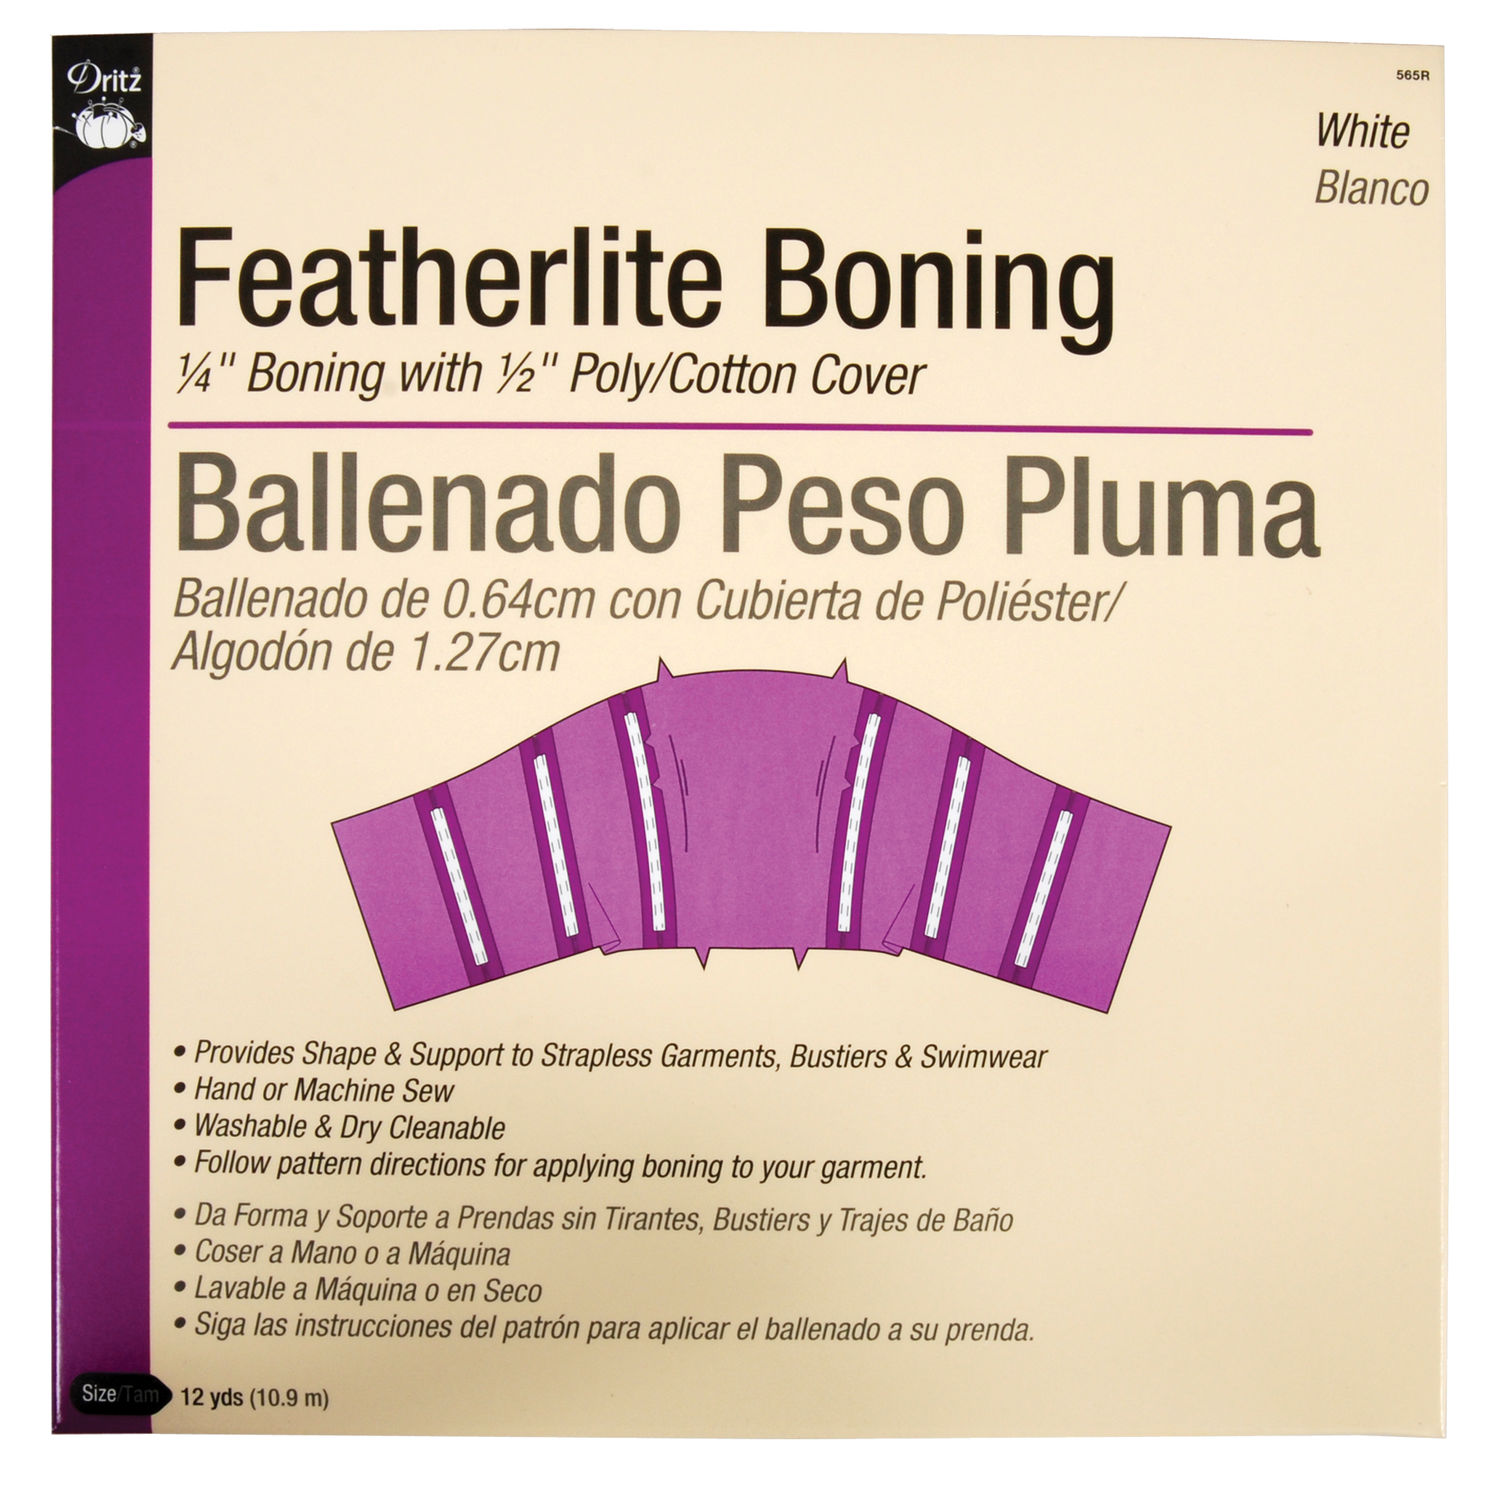 Dritz Featherlite Boning - White - 1/4 Boning with 1/2 Poly/Cotton Cover